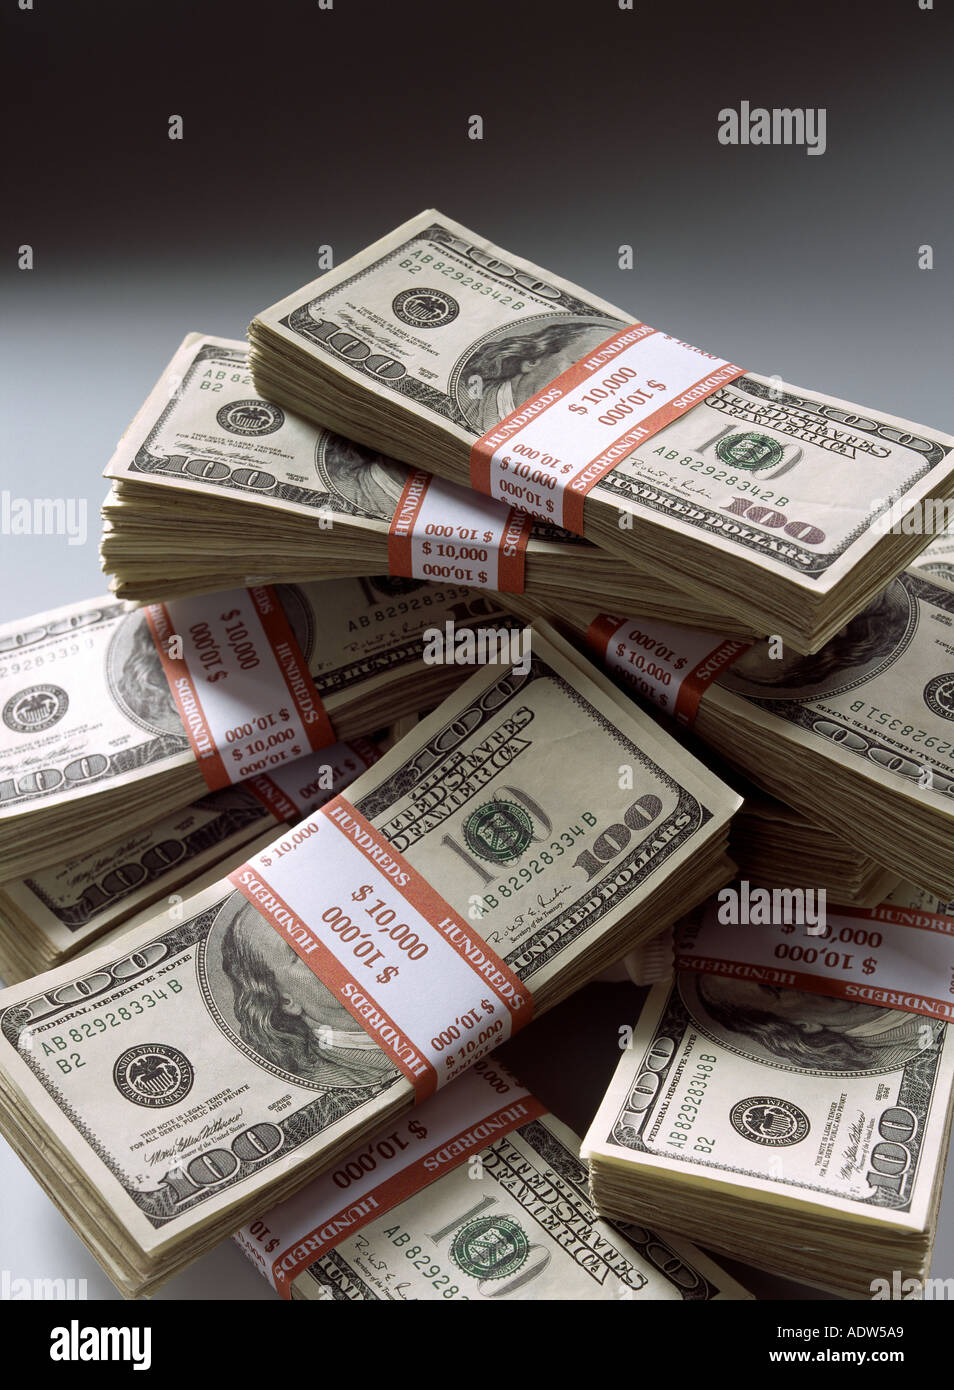 100 000 Dollars High Resolution Stock Photography And Images Alamy